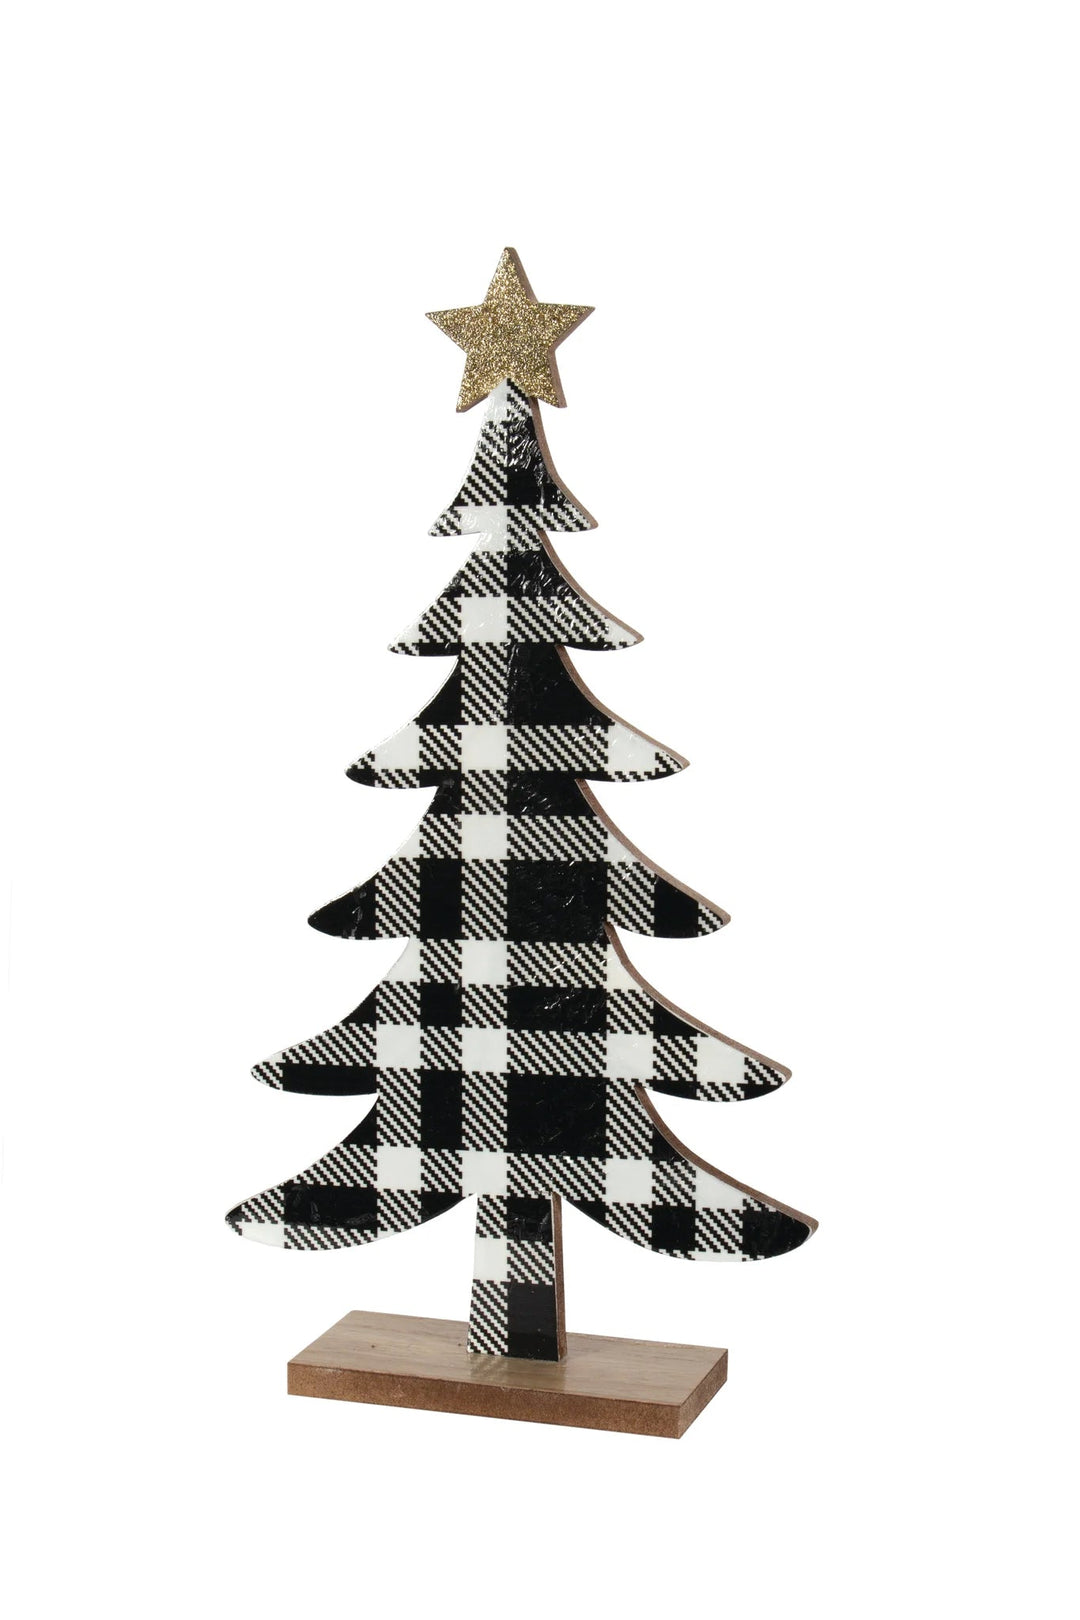 Black and White Wooden Christmas Tree, Table Decor
